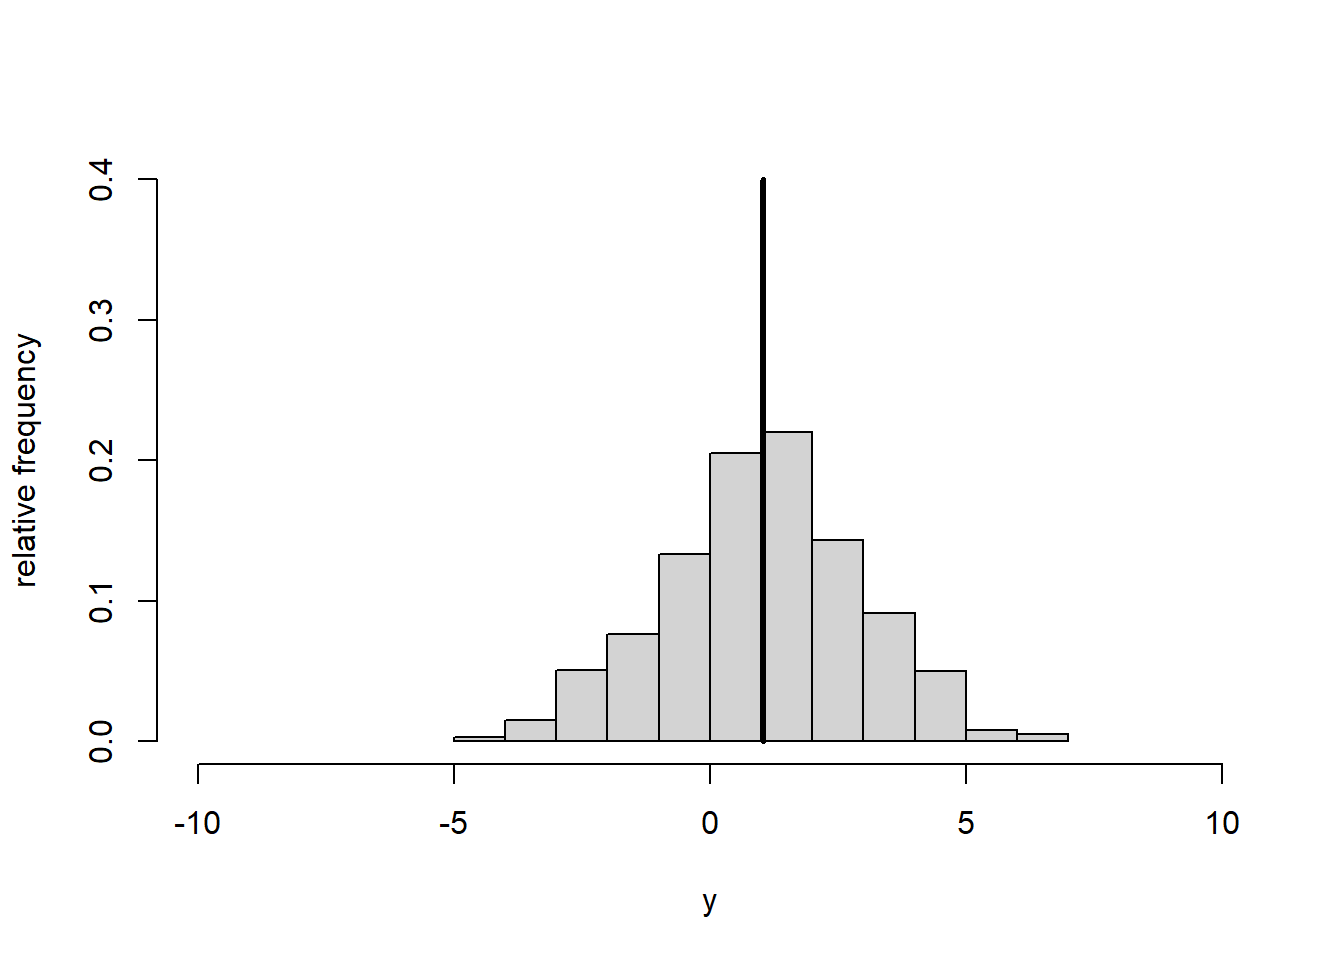 Histogram of dataset $y$ (left) and standardised dataset $y^*$ (right). The vertical line represents the mean.